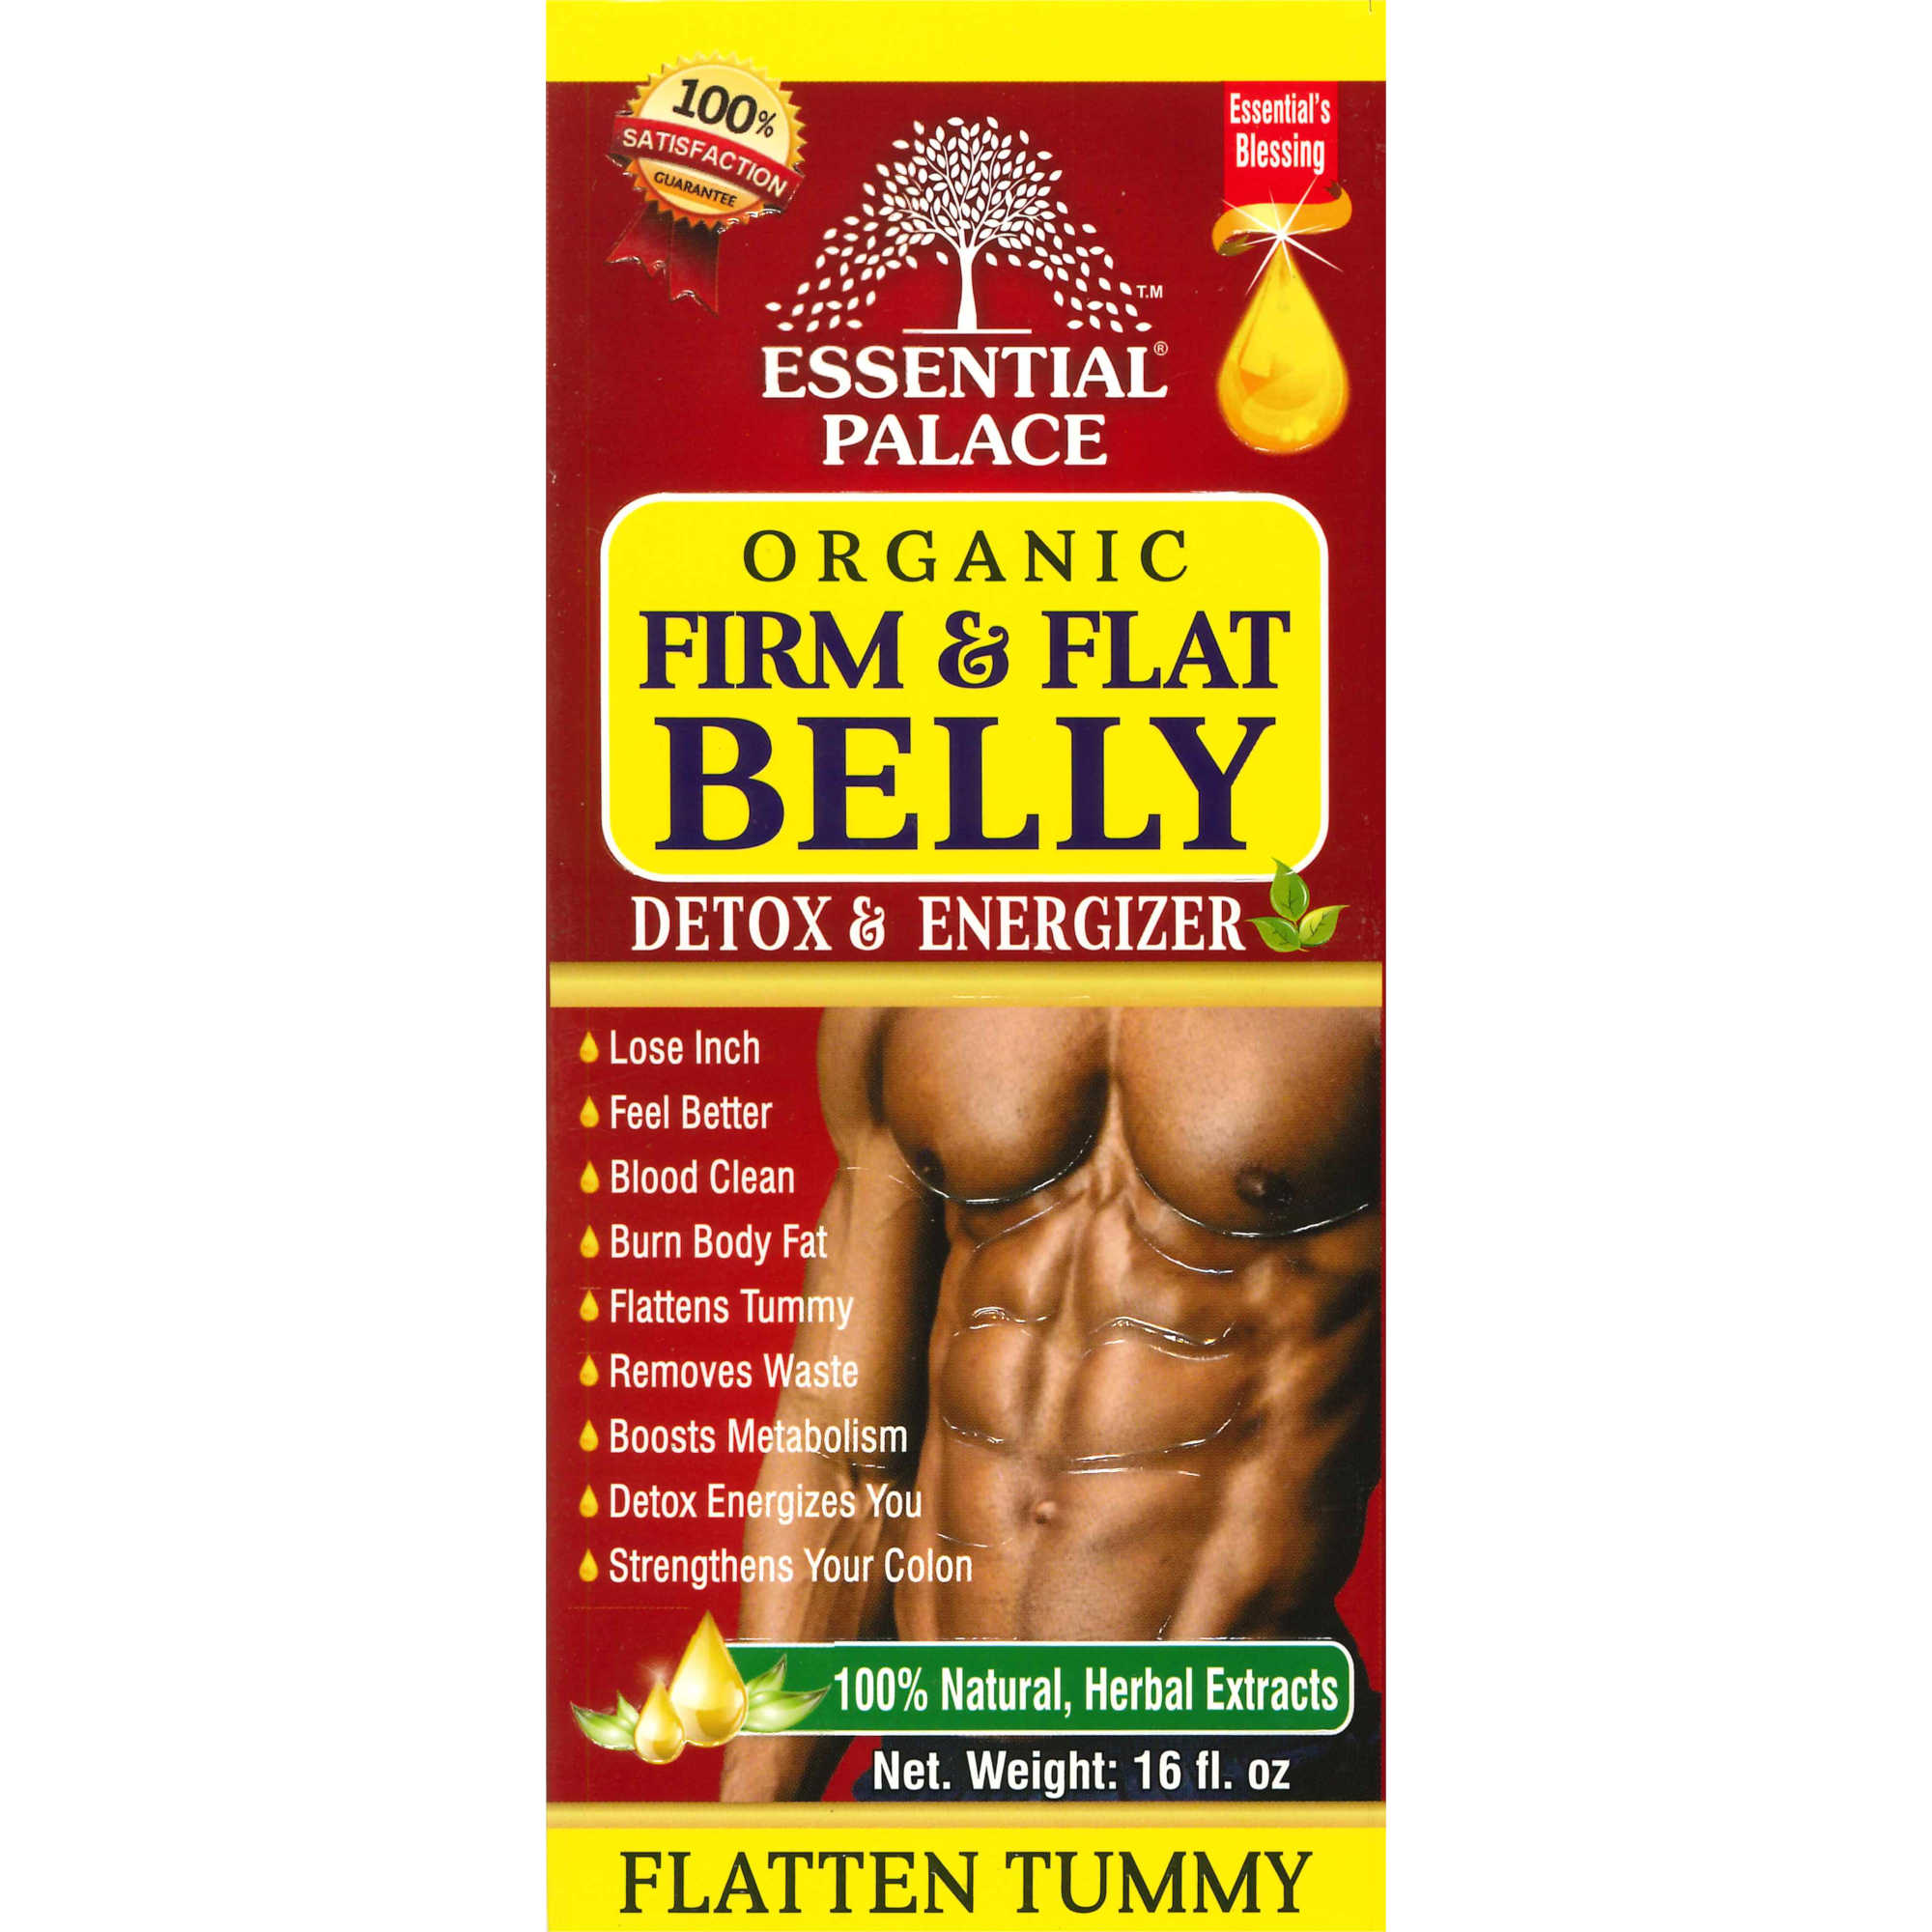 Essential Palace Organic Firm and Flat Belly Detox and Energizer Burns Fat Flattens Tummy 16 OZ front 2